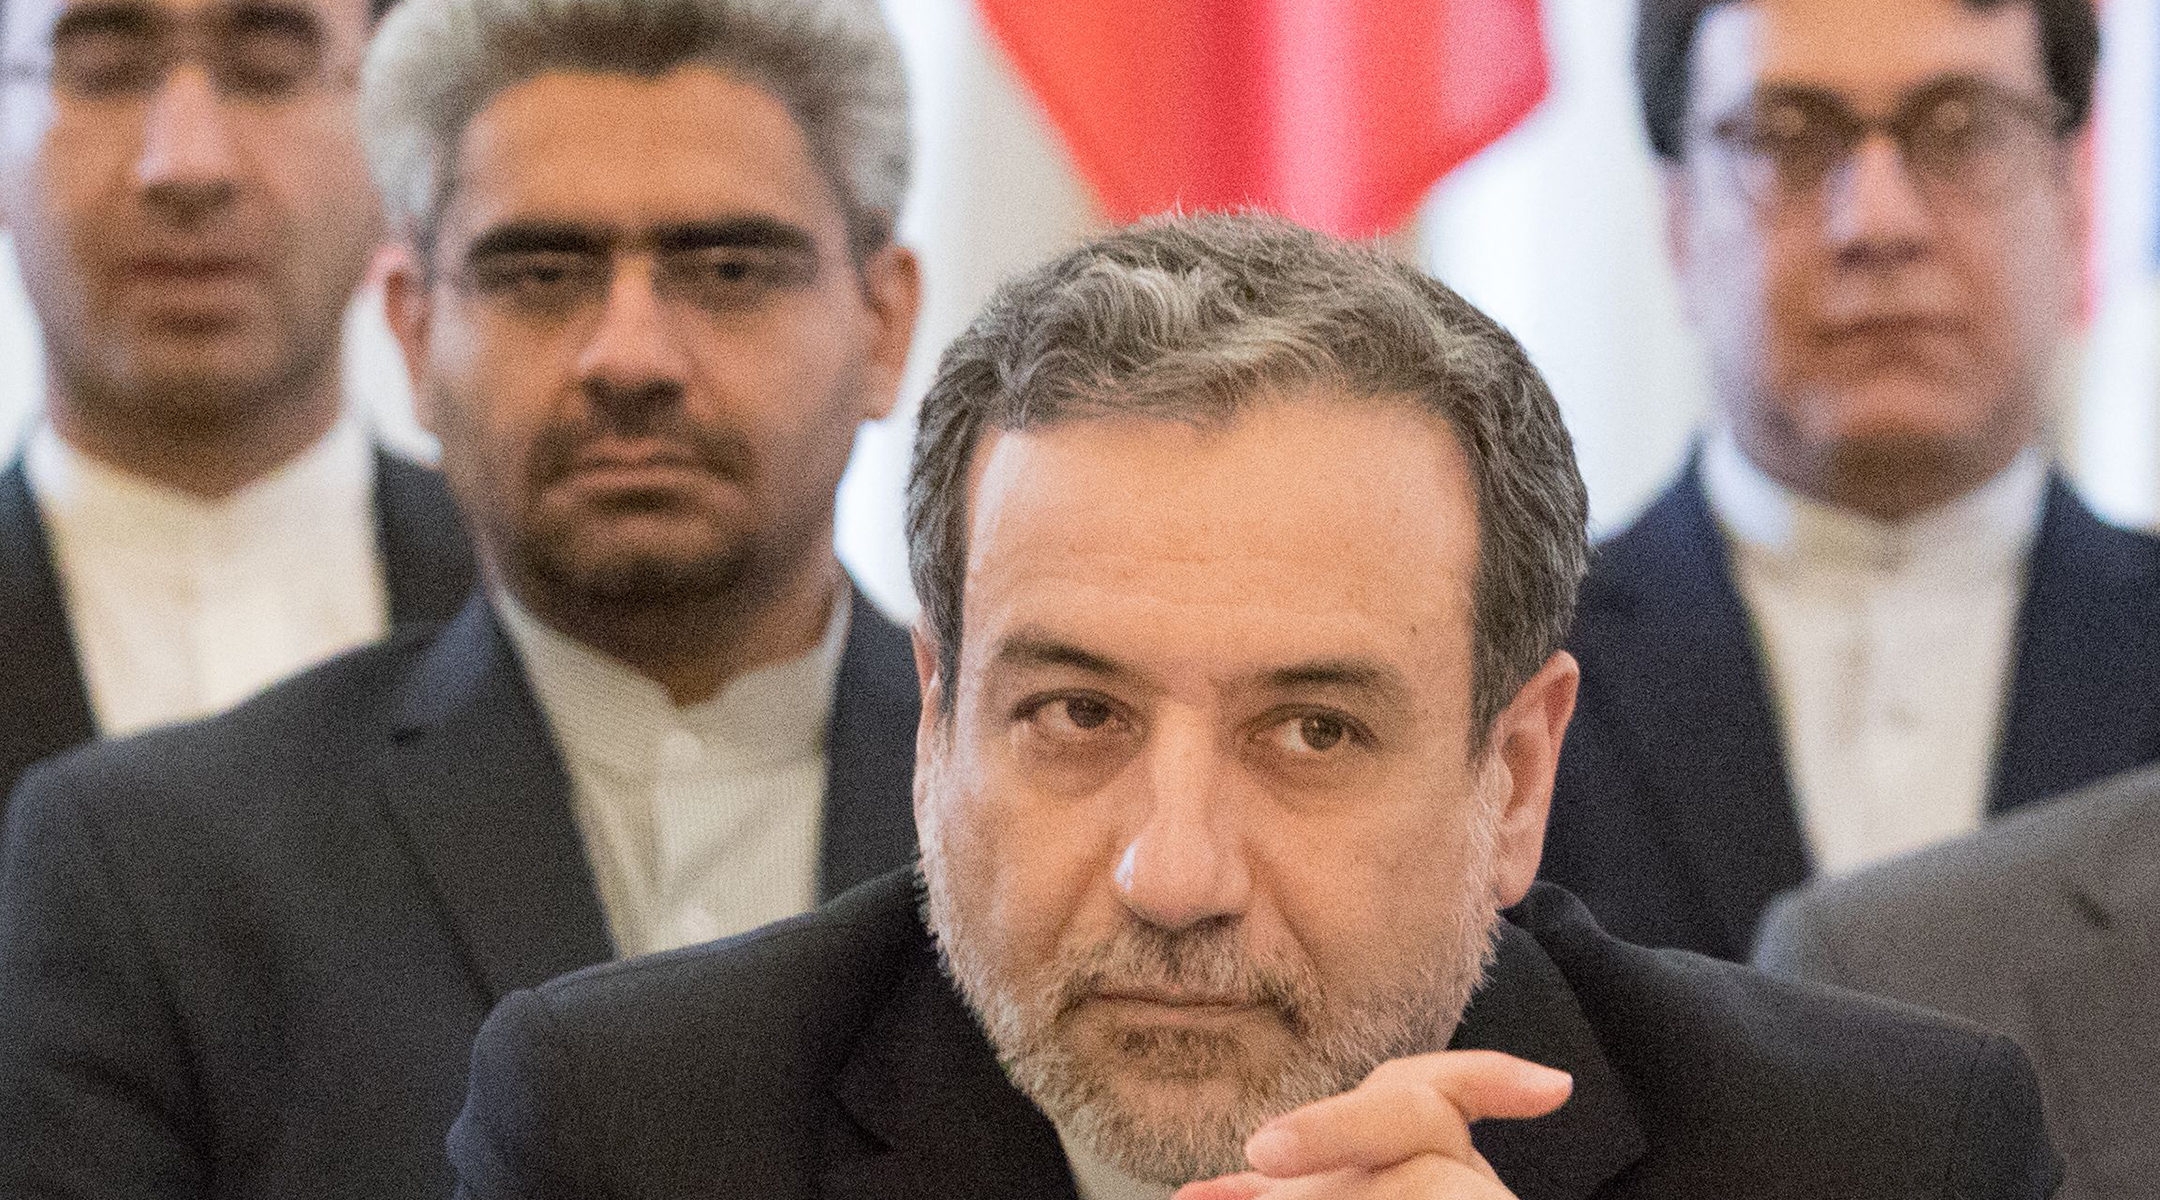 Abbas Araghchi, political deputy at the Ministry of Foreign Affairs of Iran, during a meeting in Vienna on June 28, 2019. (Photo by Alex Halada / AFP)